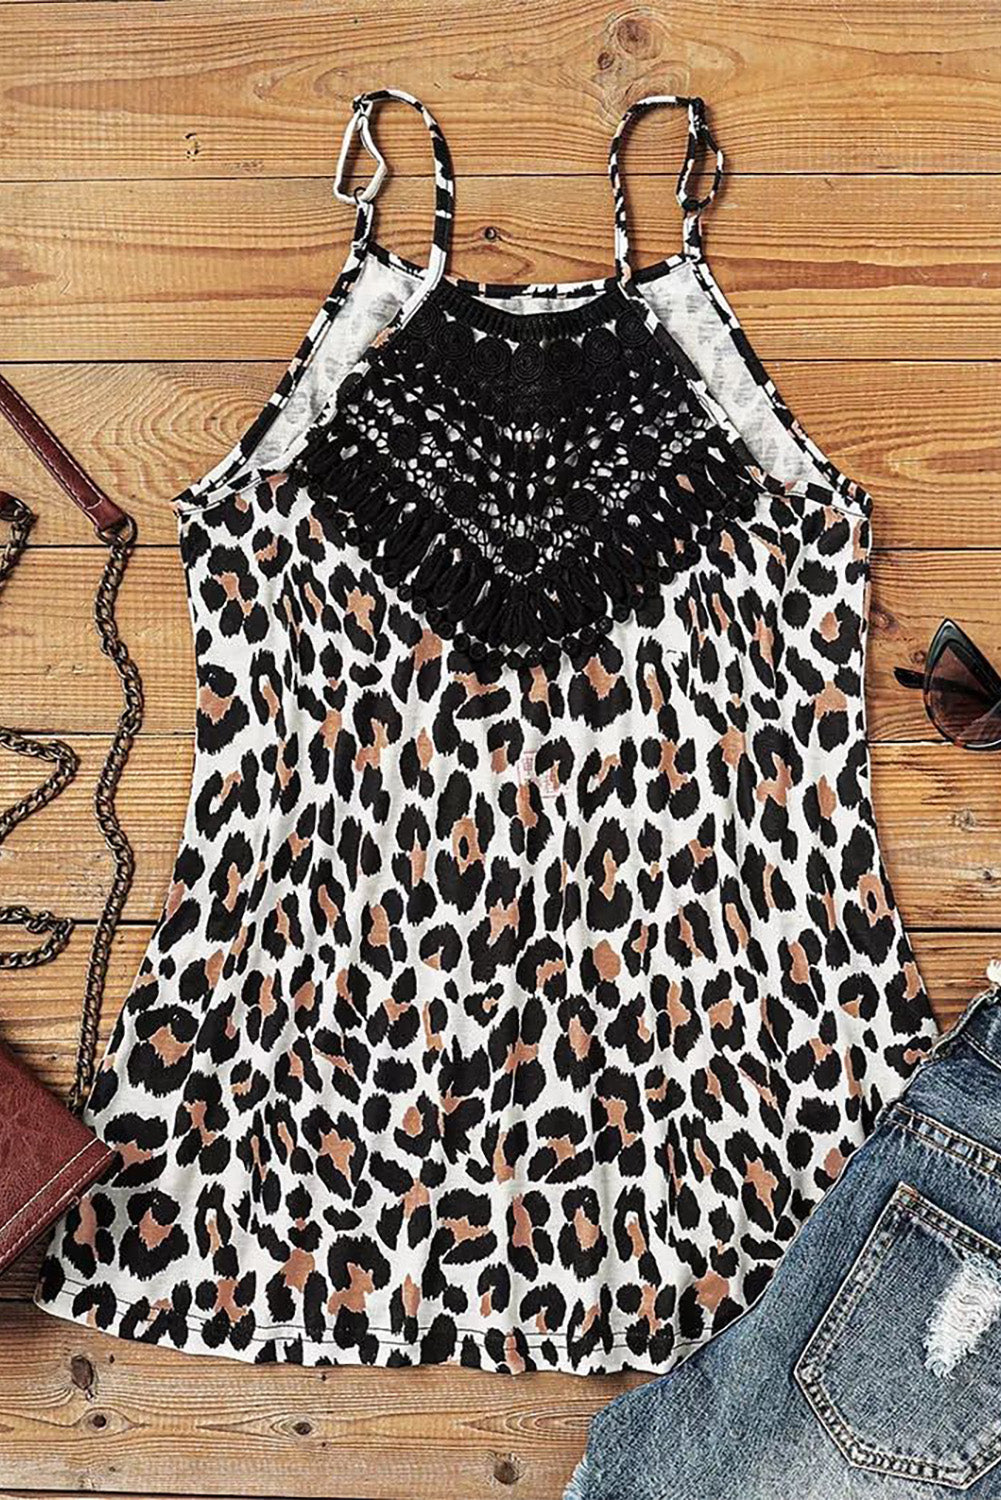 Leopard and Lace – Amaryllis Apparel